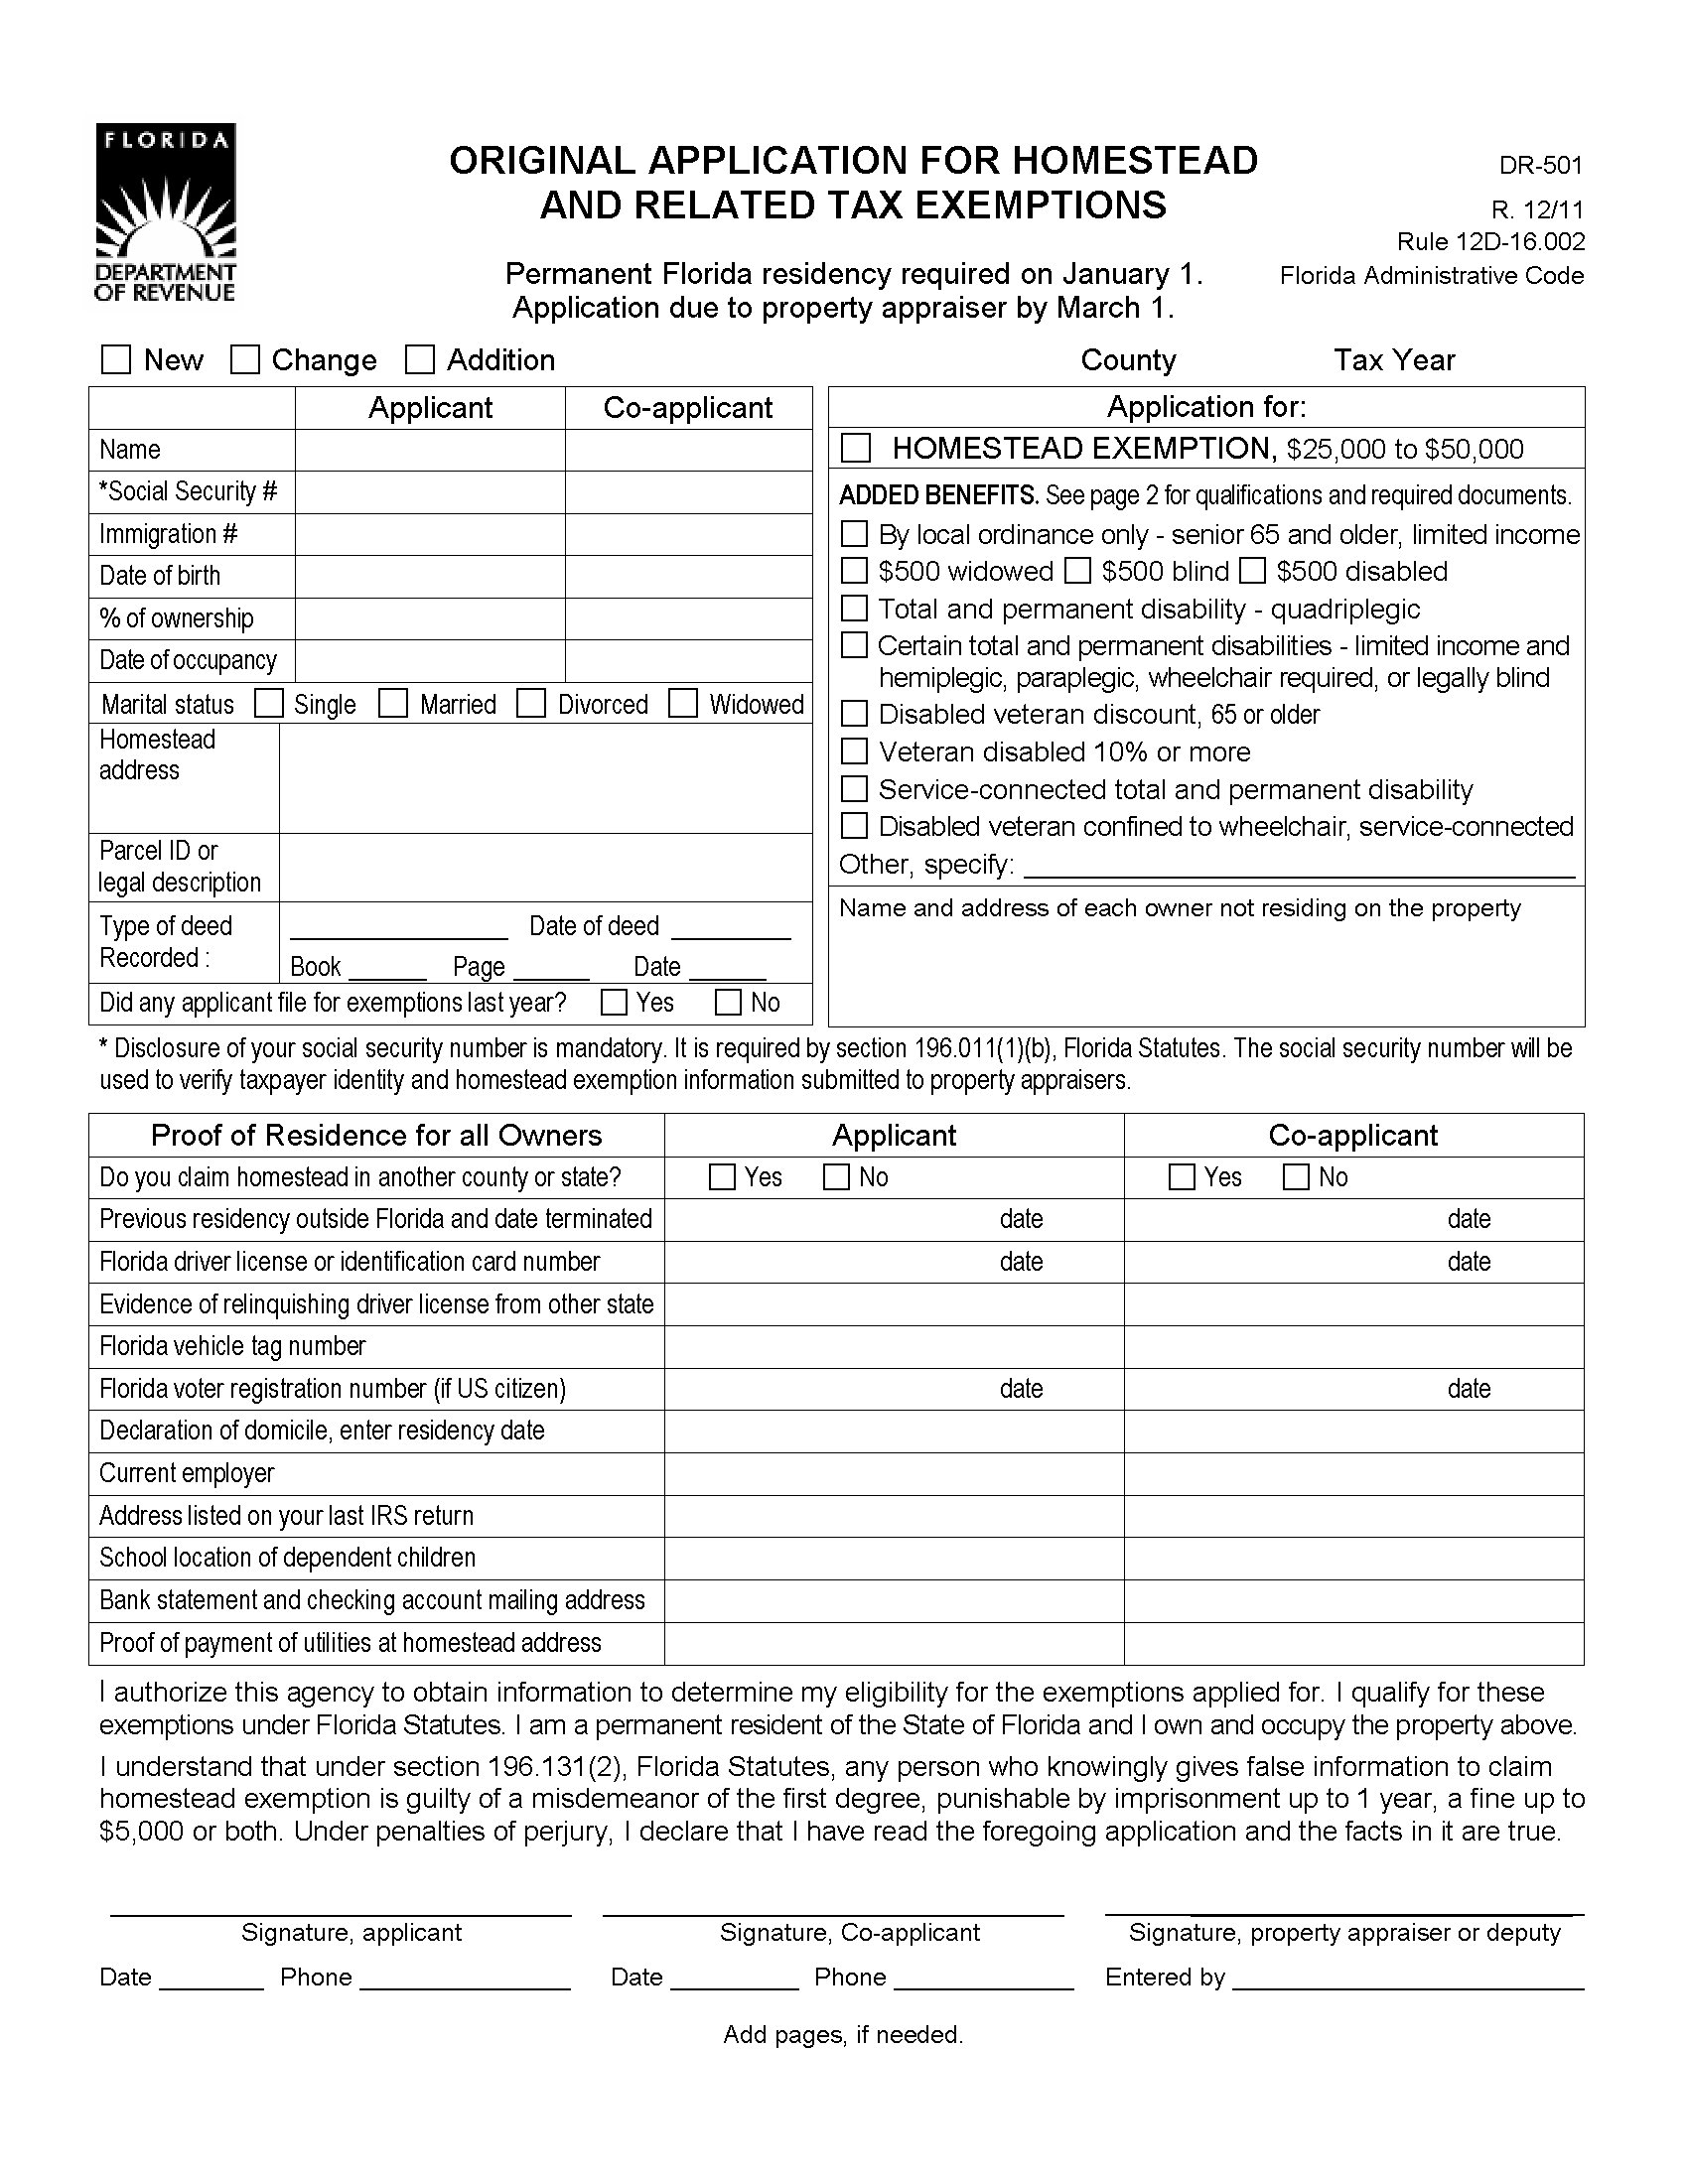 florida-original-application-for-homestead-legal-forms-and-business